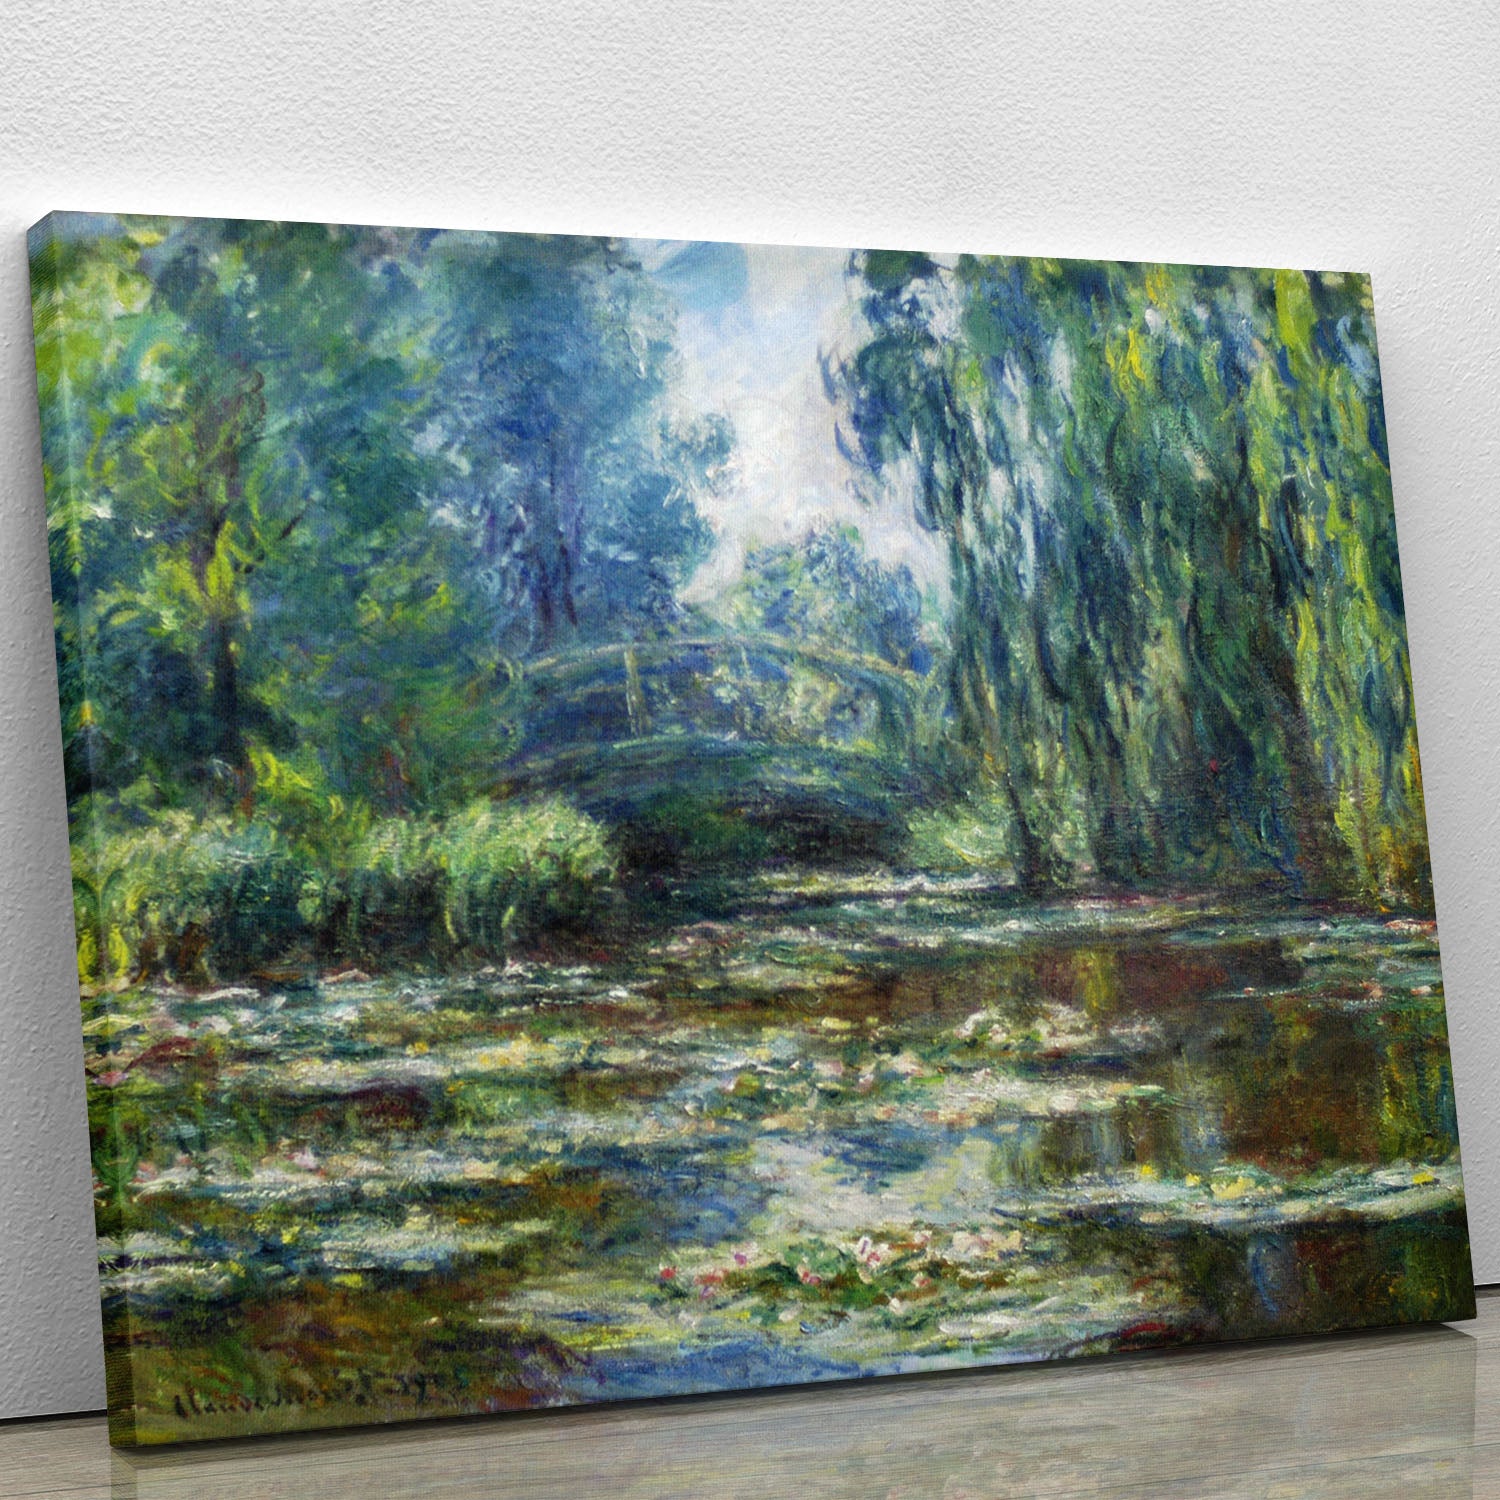 Water Lillies in Monets Garden by Monet Canvas Print or Poster - Canvas Art Rocks - 1